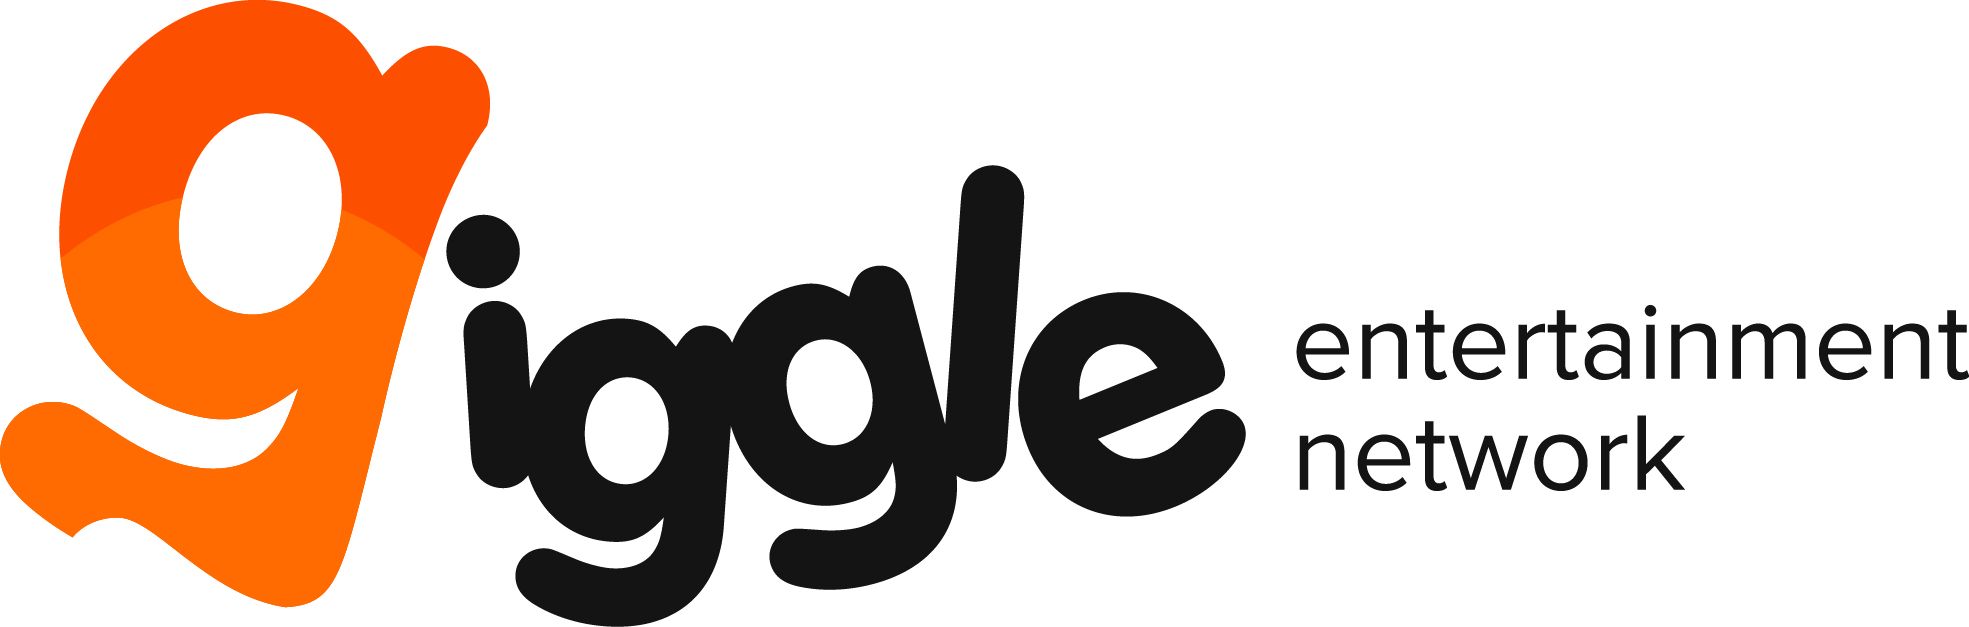 Giggle Entertainment Network